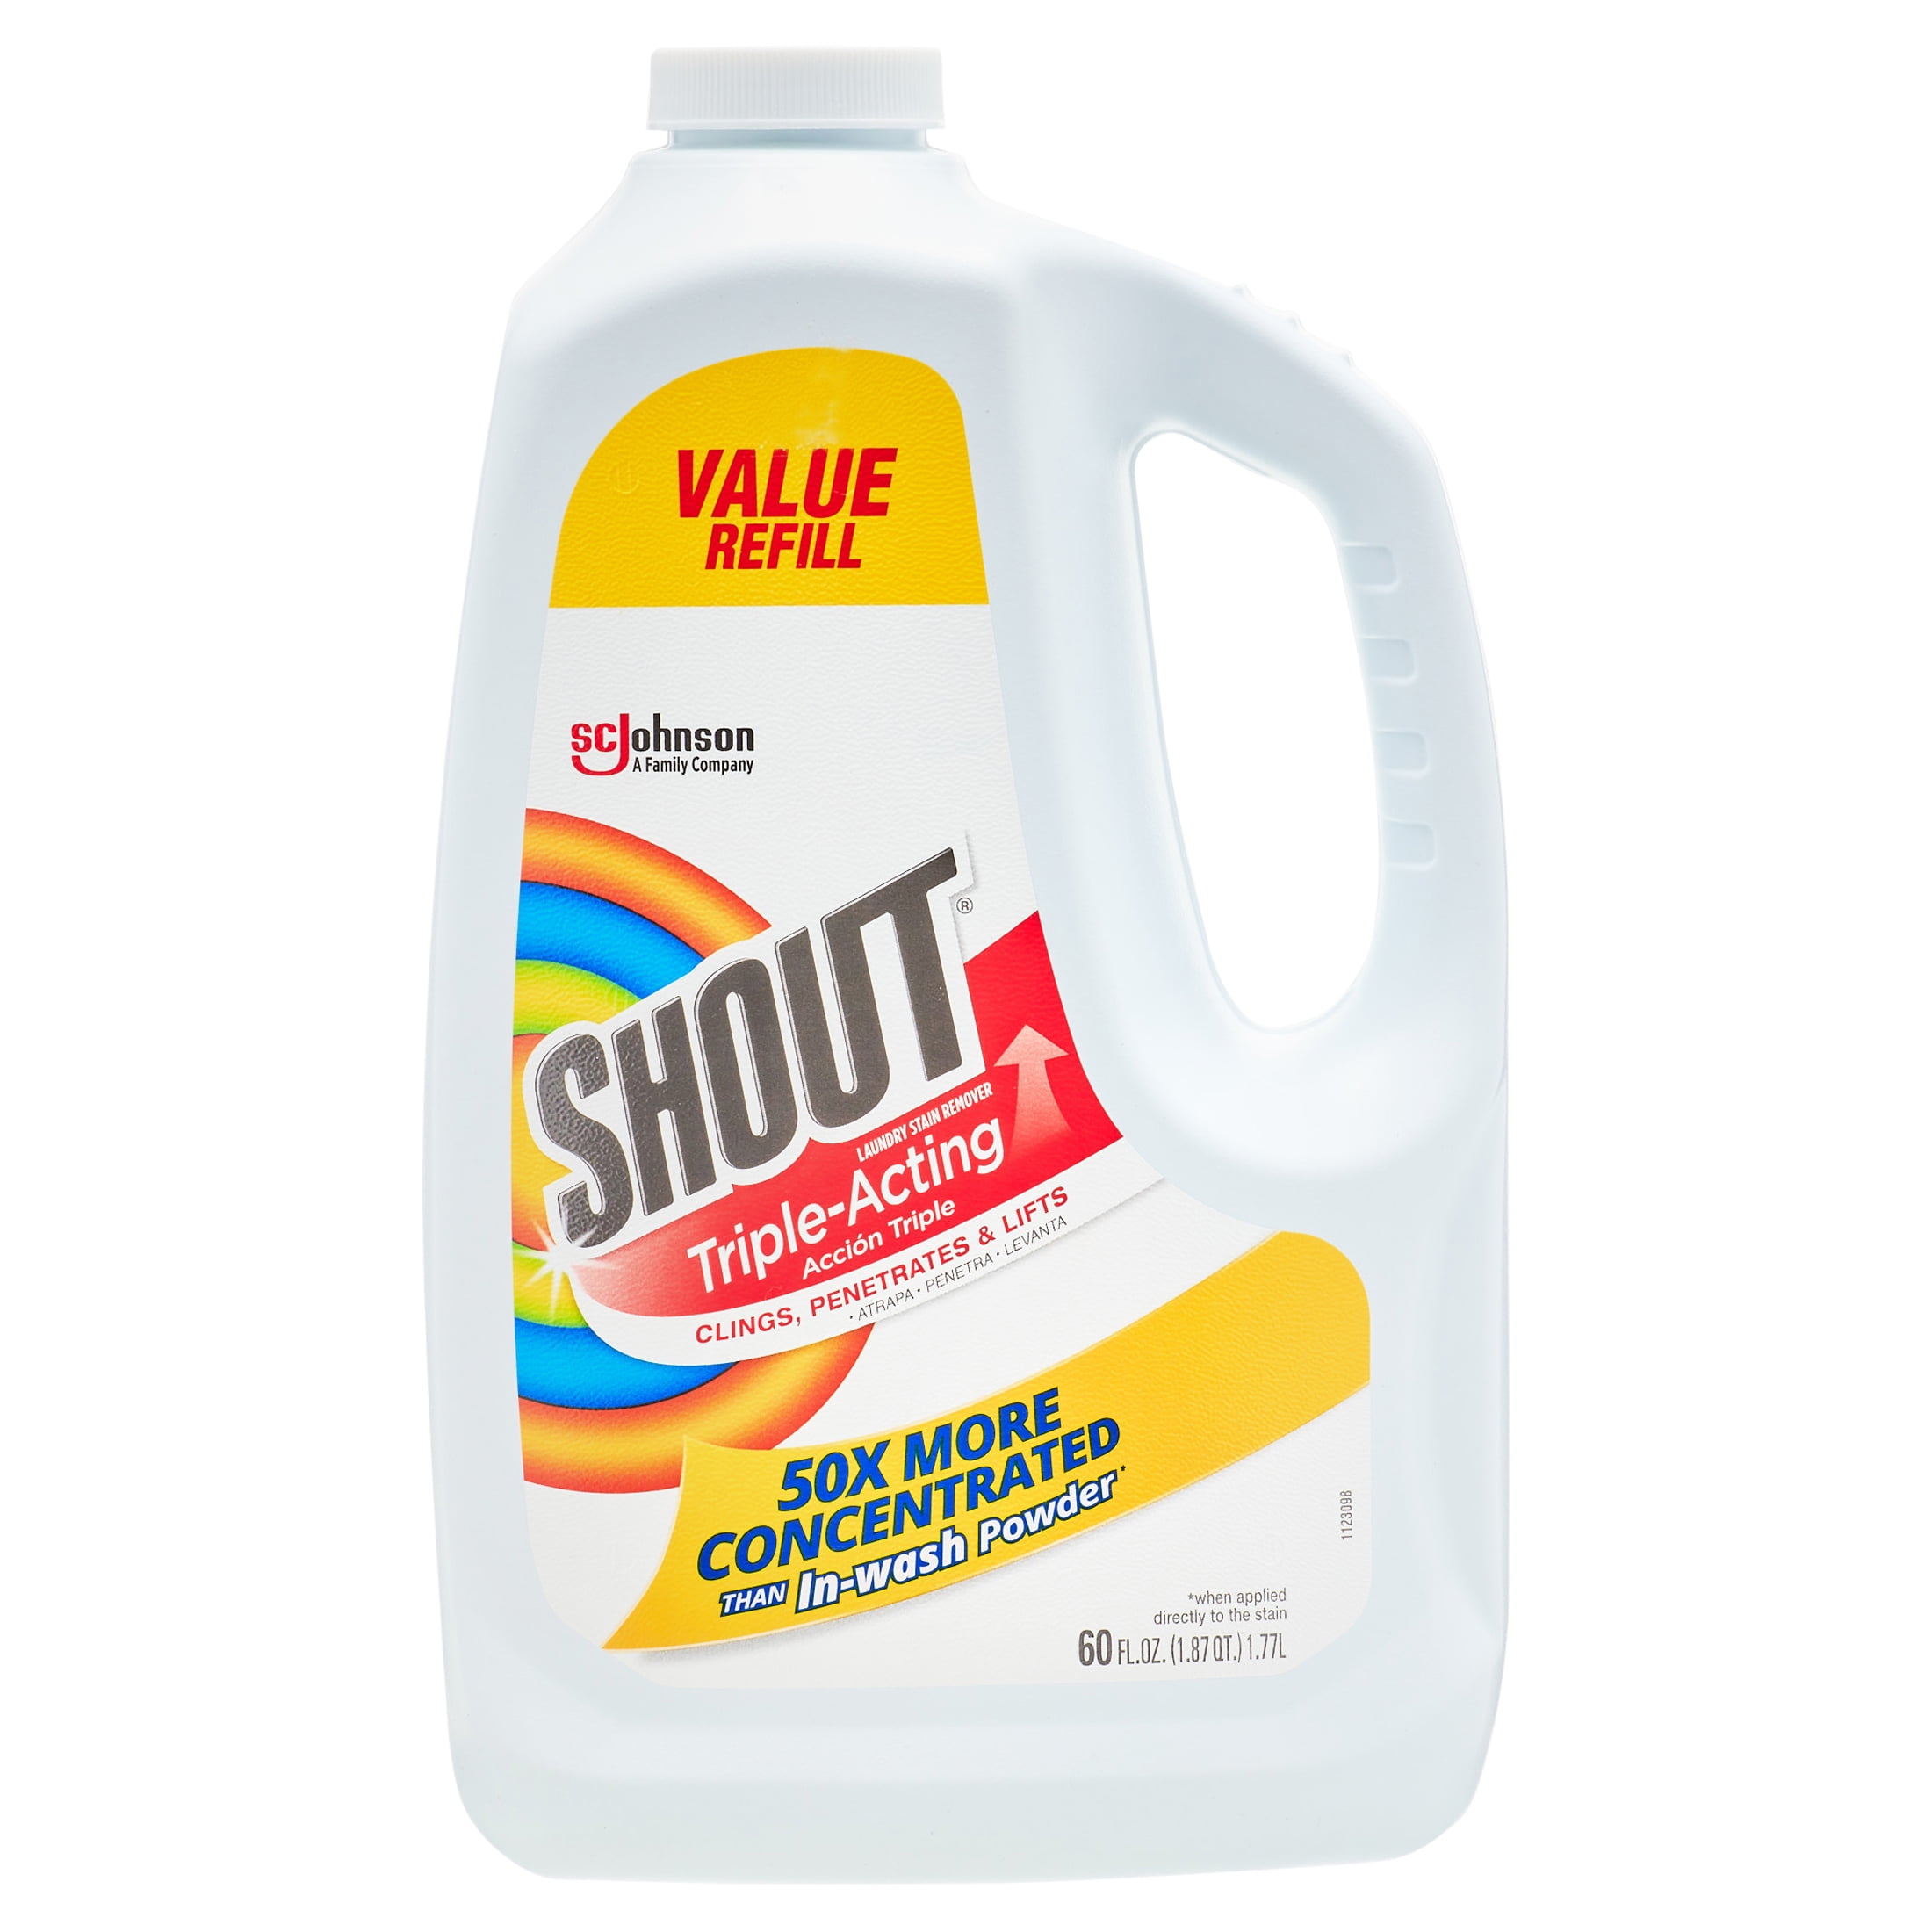 Shout Triple-Acting Laundry Stain Remover Spray Bottle for Everyday Stains,  30 fl oz Value Pack